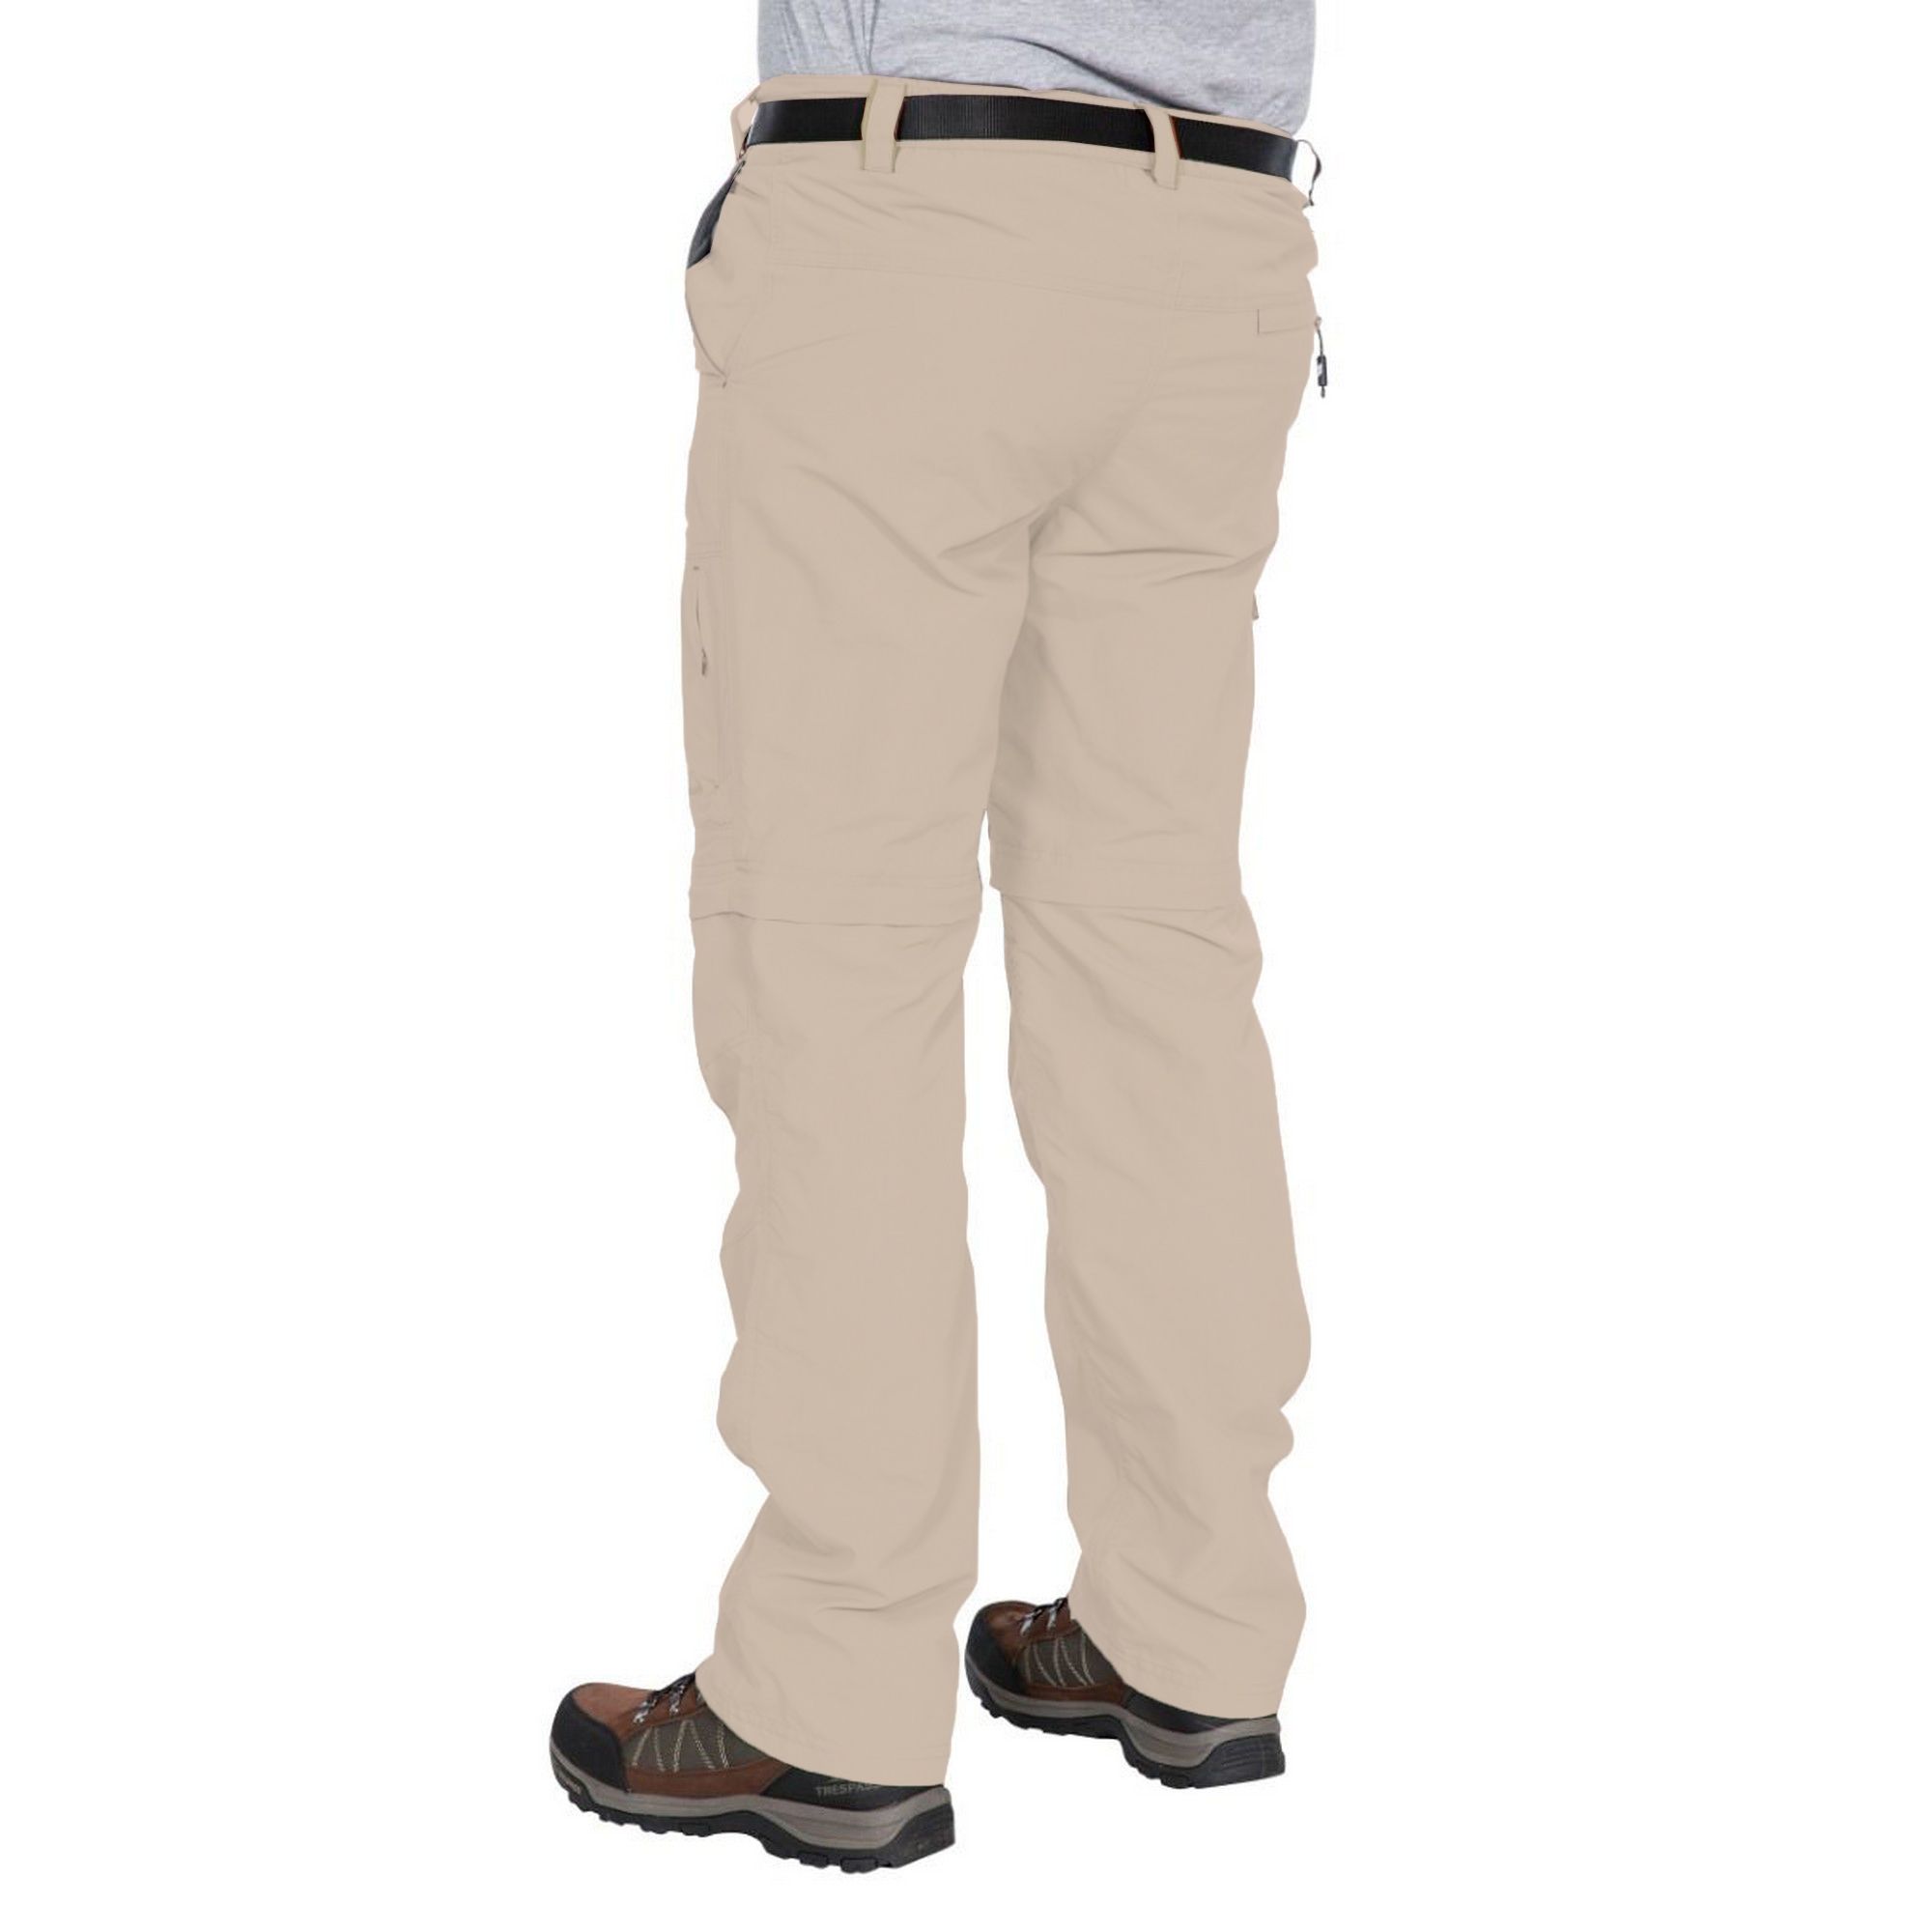 Flat waist with elasticated back panel. Adjustable belt. Zip off legs. Fly front opening. 6 pockets. Quick dry. UV 40+. Mosquito repellent finish. HHL technology. 100% Polyamide. Trespass Mens Waist Sizing (approx): S - 32in/81cm, M - 34in/86cm, L - 36in/91.5cm, XL - 38in/96.5cm, XXL - 40in/101.5cm, 3XL - 42in/106.5cm.